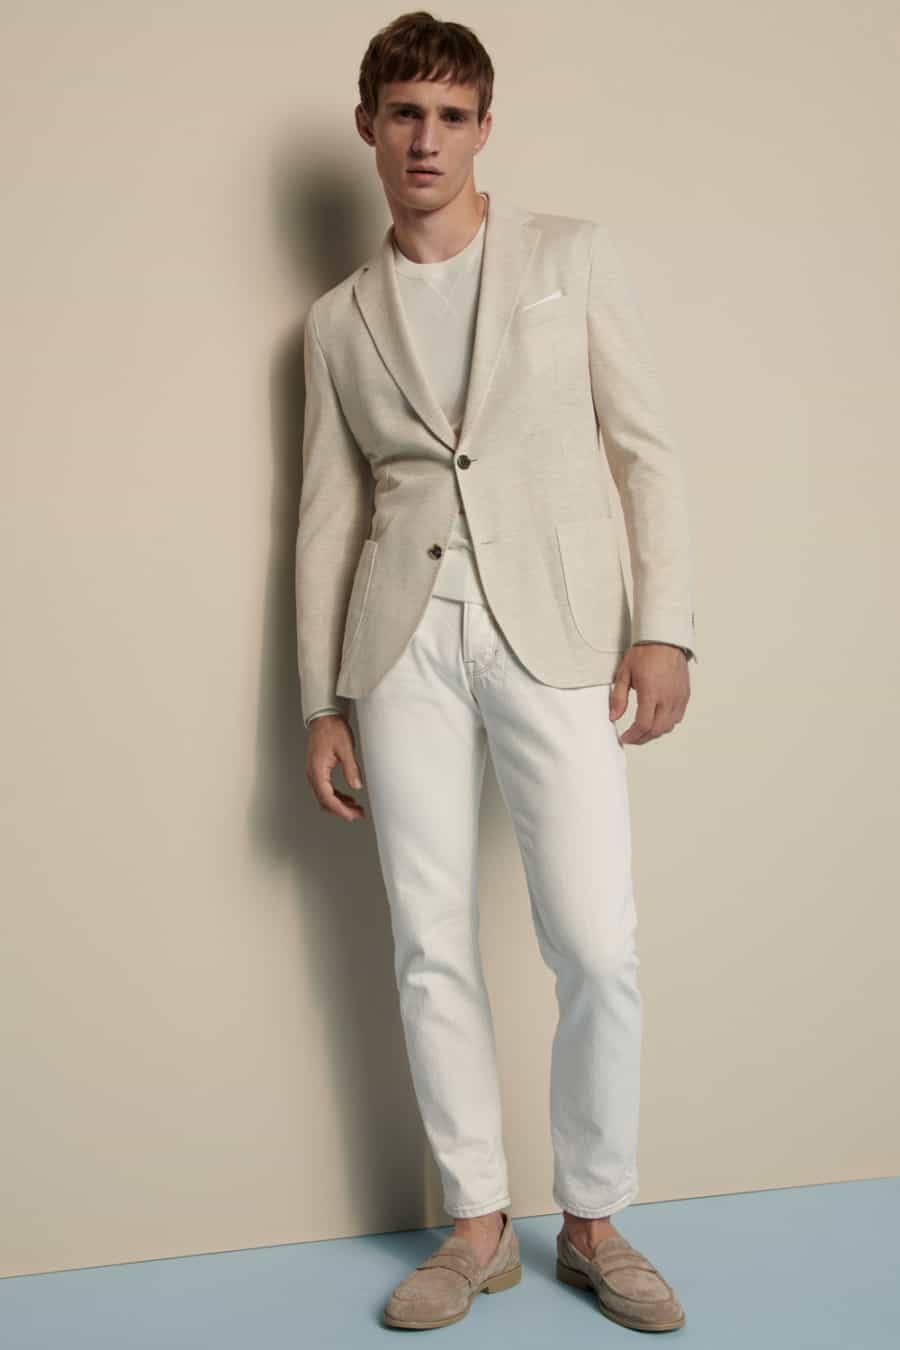 Men's. white jeans, white T-shirt, off-white blazer and suede loafers outfit